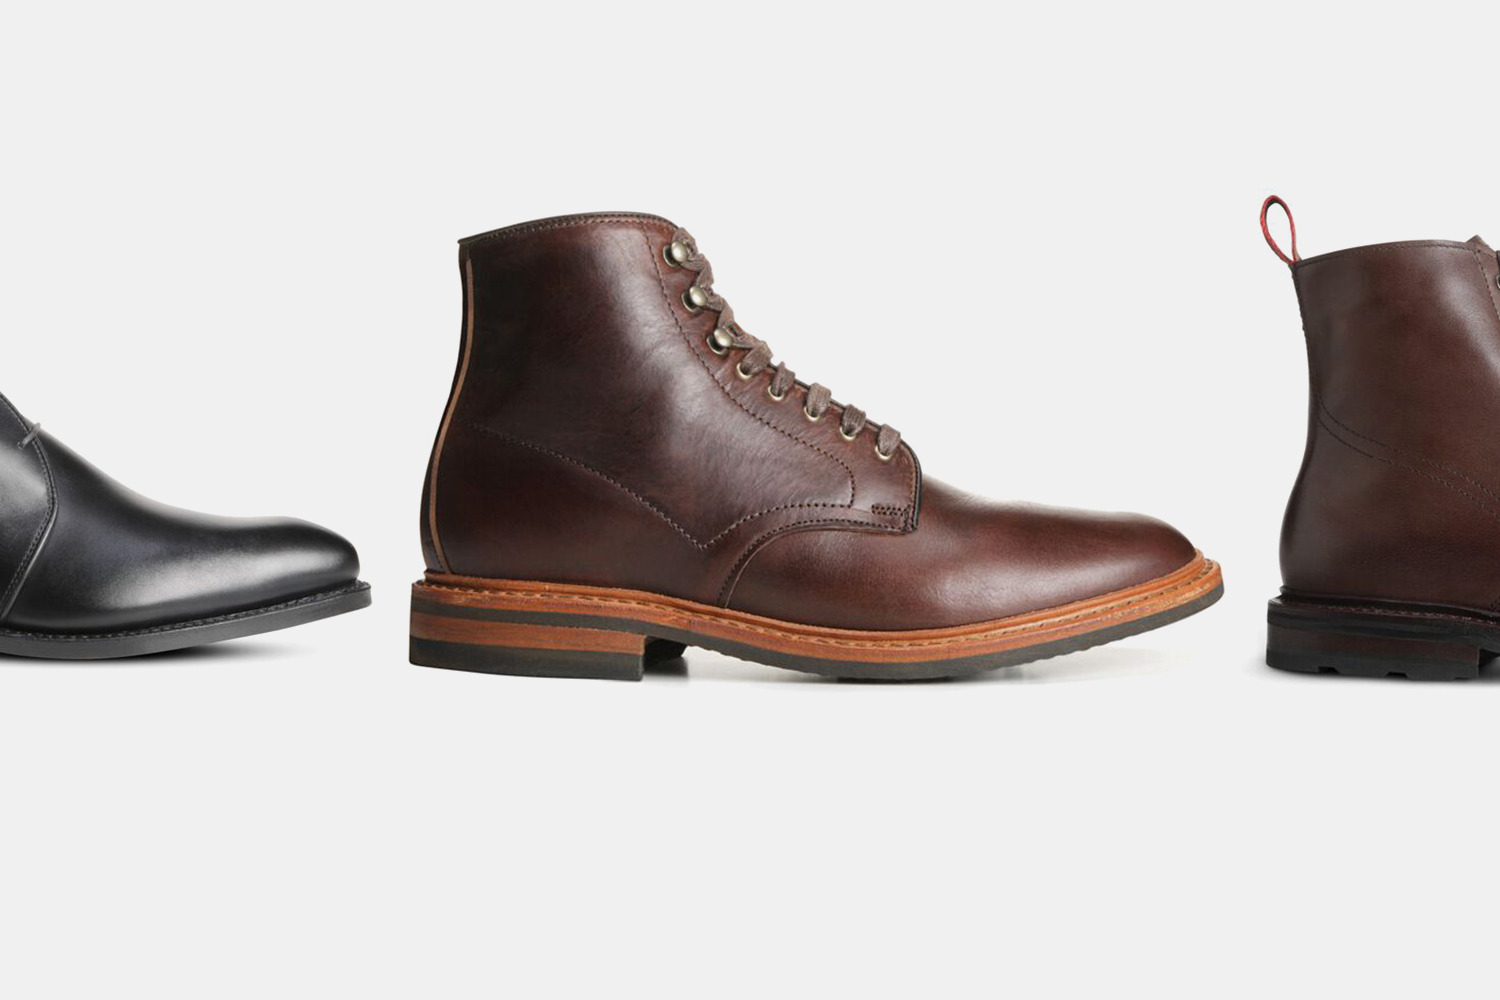 Take Up To 40% Off Select Boots At Allen Edmonds - Insidehook